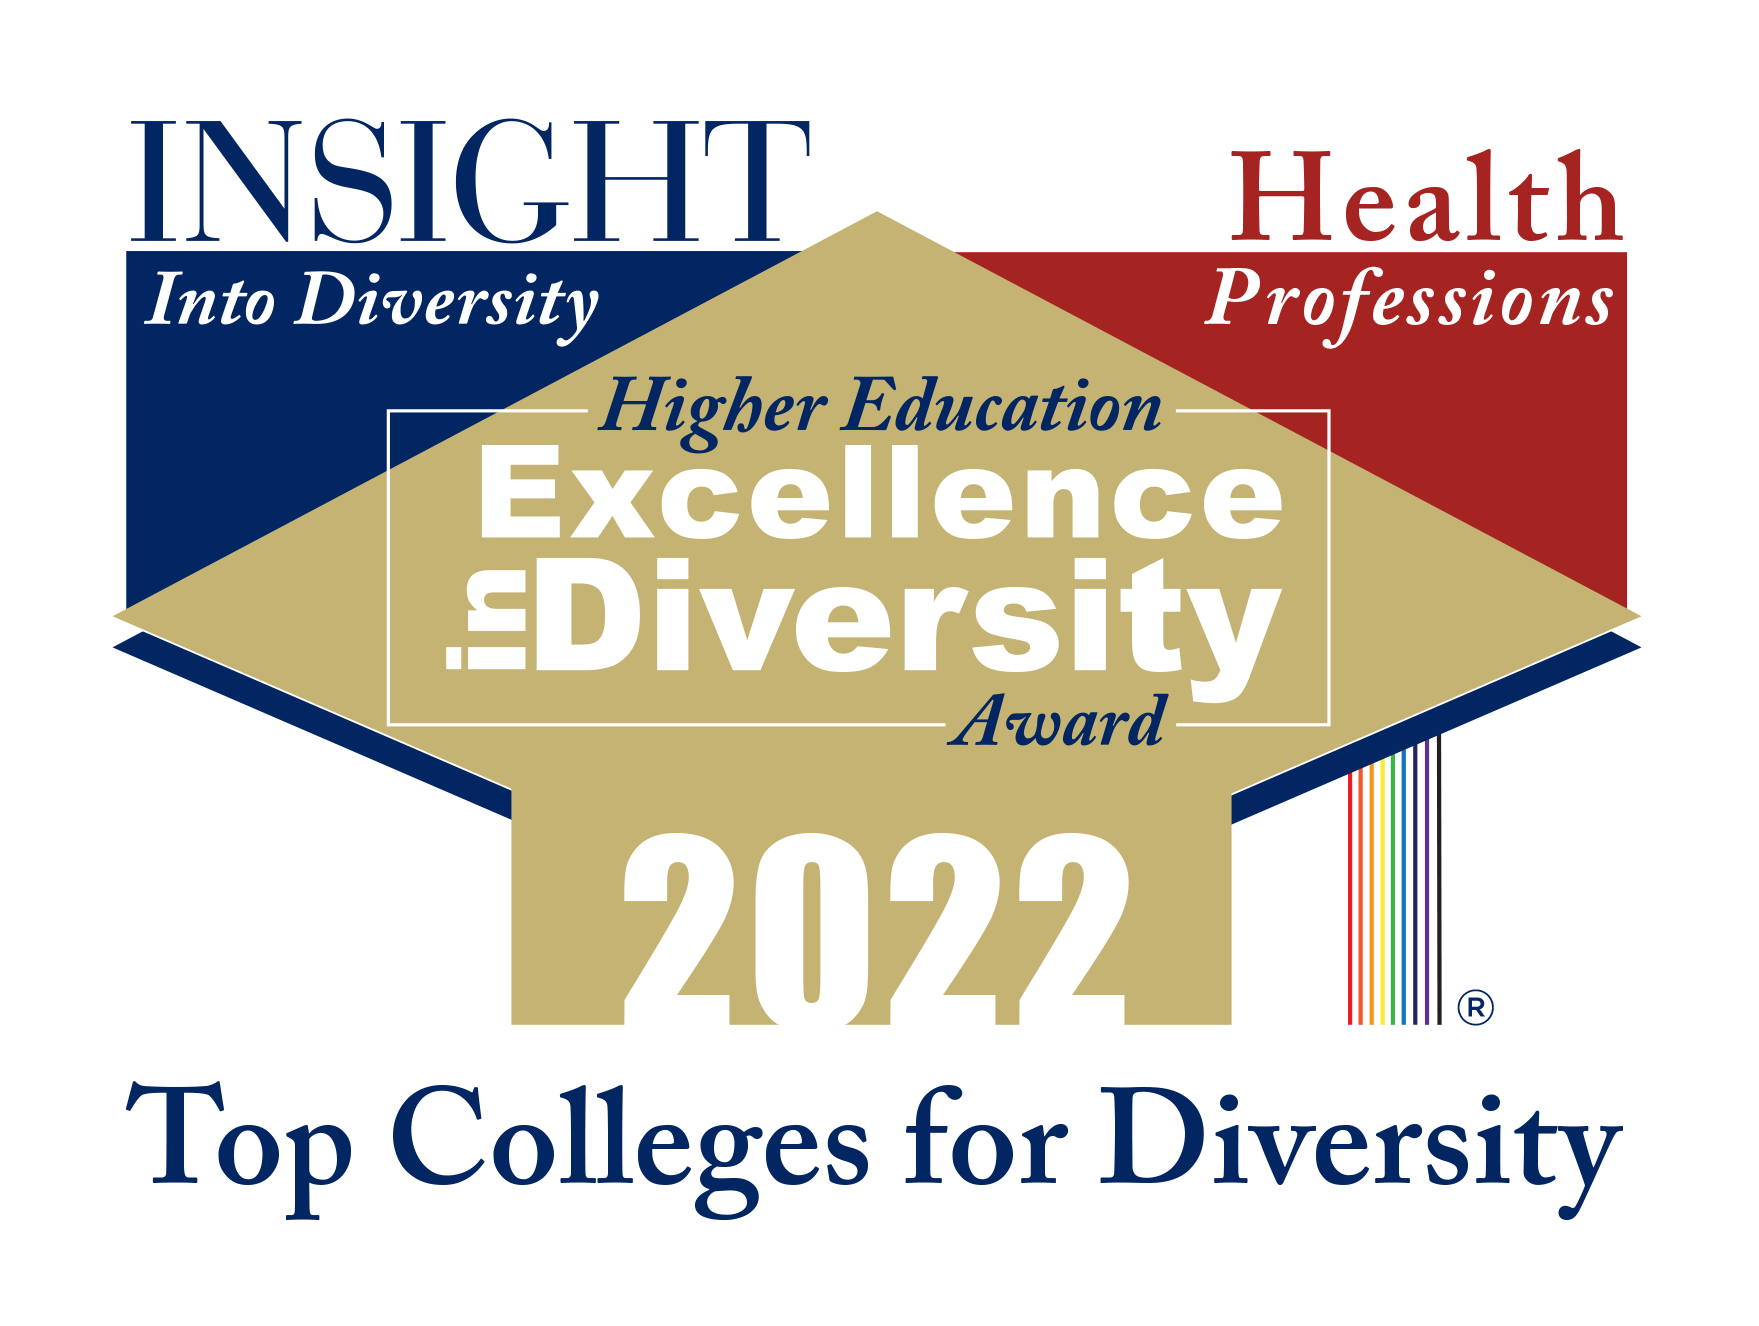 INSIGHT Into Diversity Higher Education Excellence in Diversity Award 2022